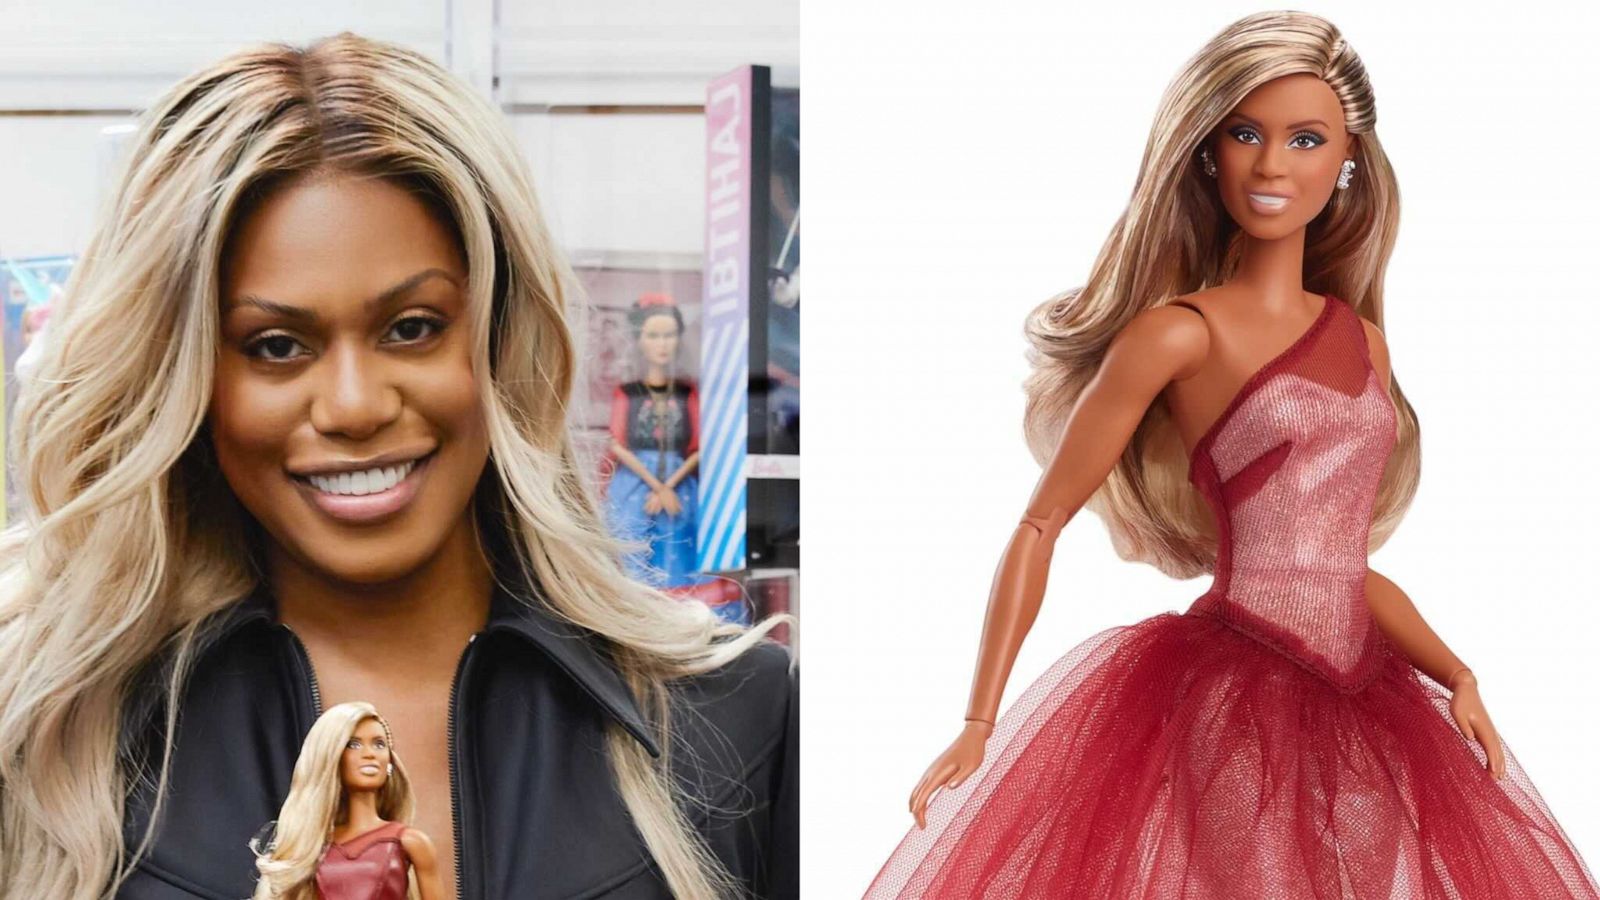 Mattel's latest lineup of diverse dolls includes a Barbie with